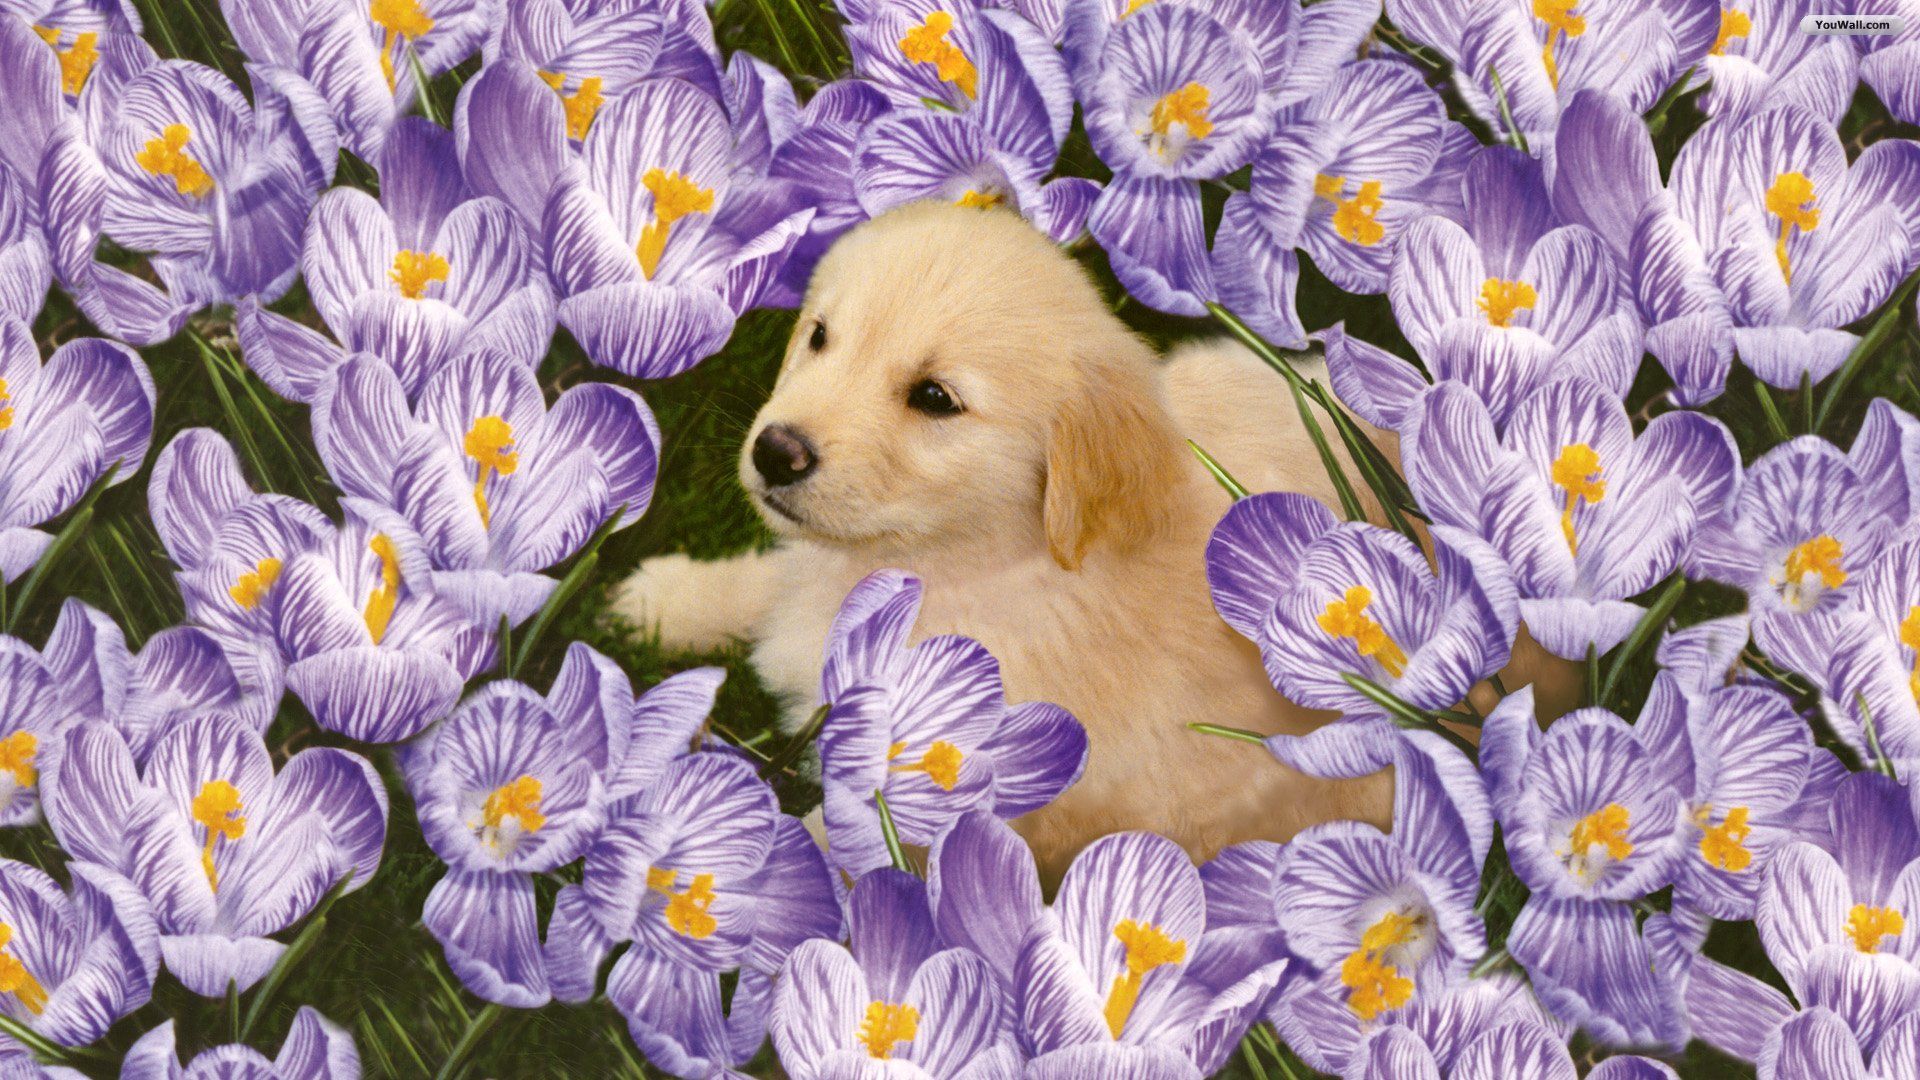 Puppies Flower The Cutest. Puppy flowers, Cute puppies, Cute